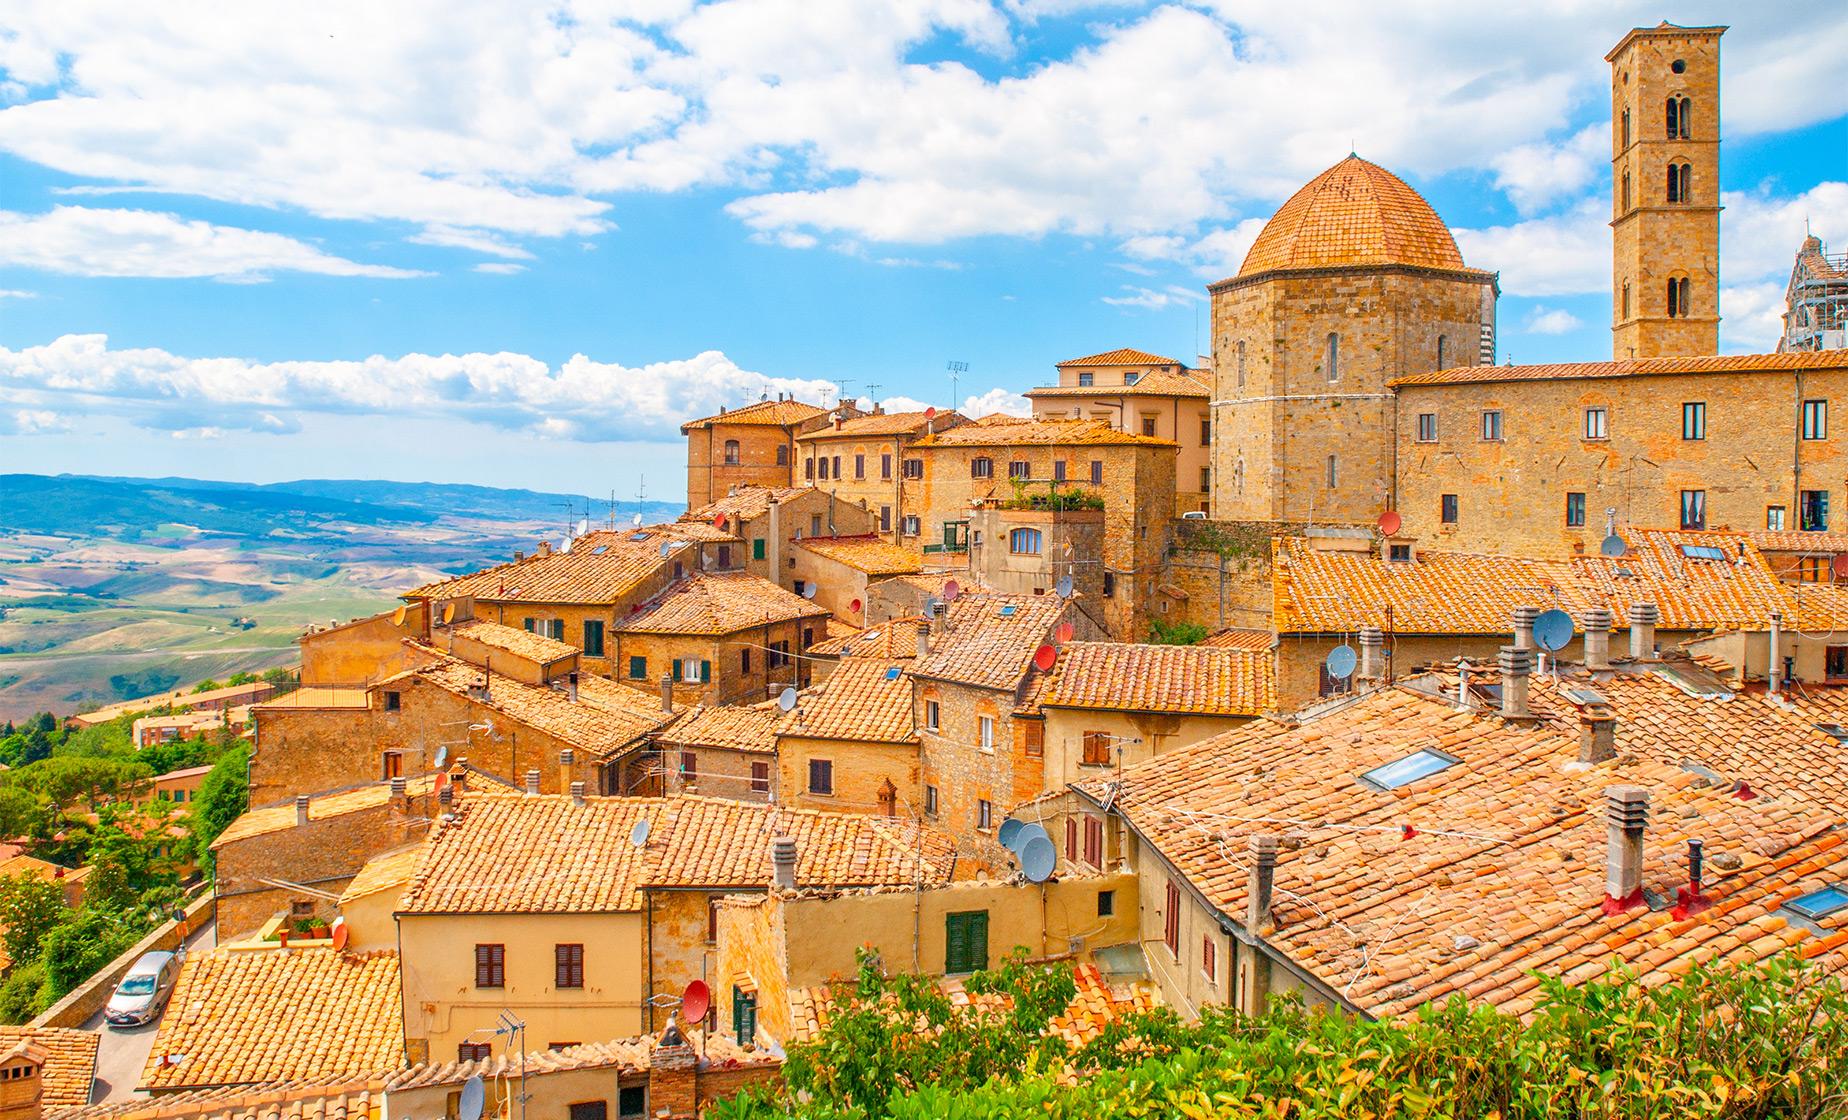 Private Volterra and San Gimignano Highlights Tour